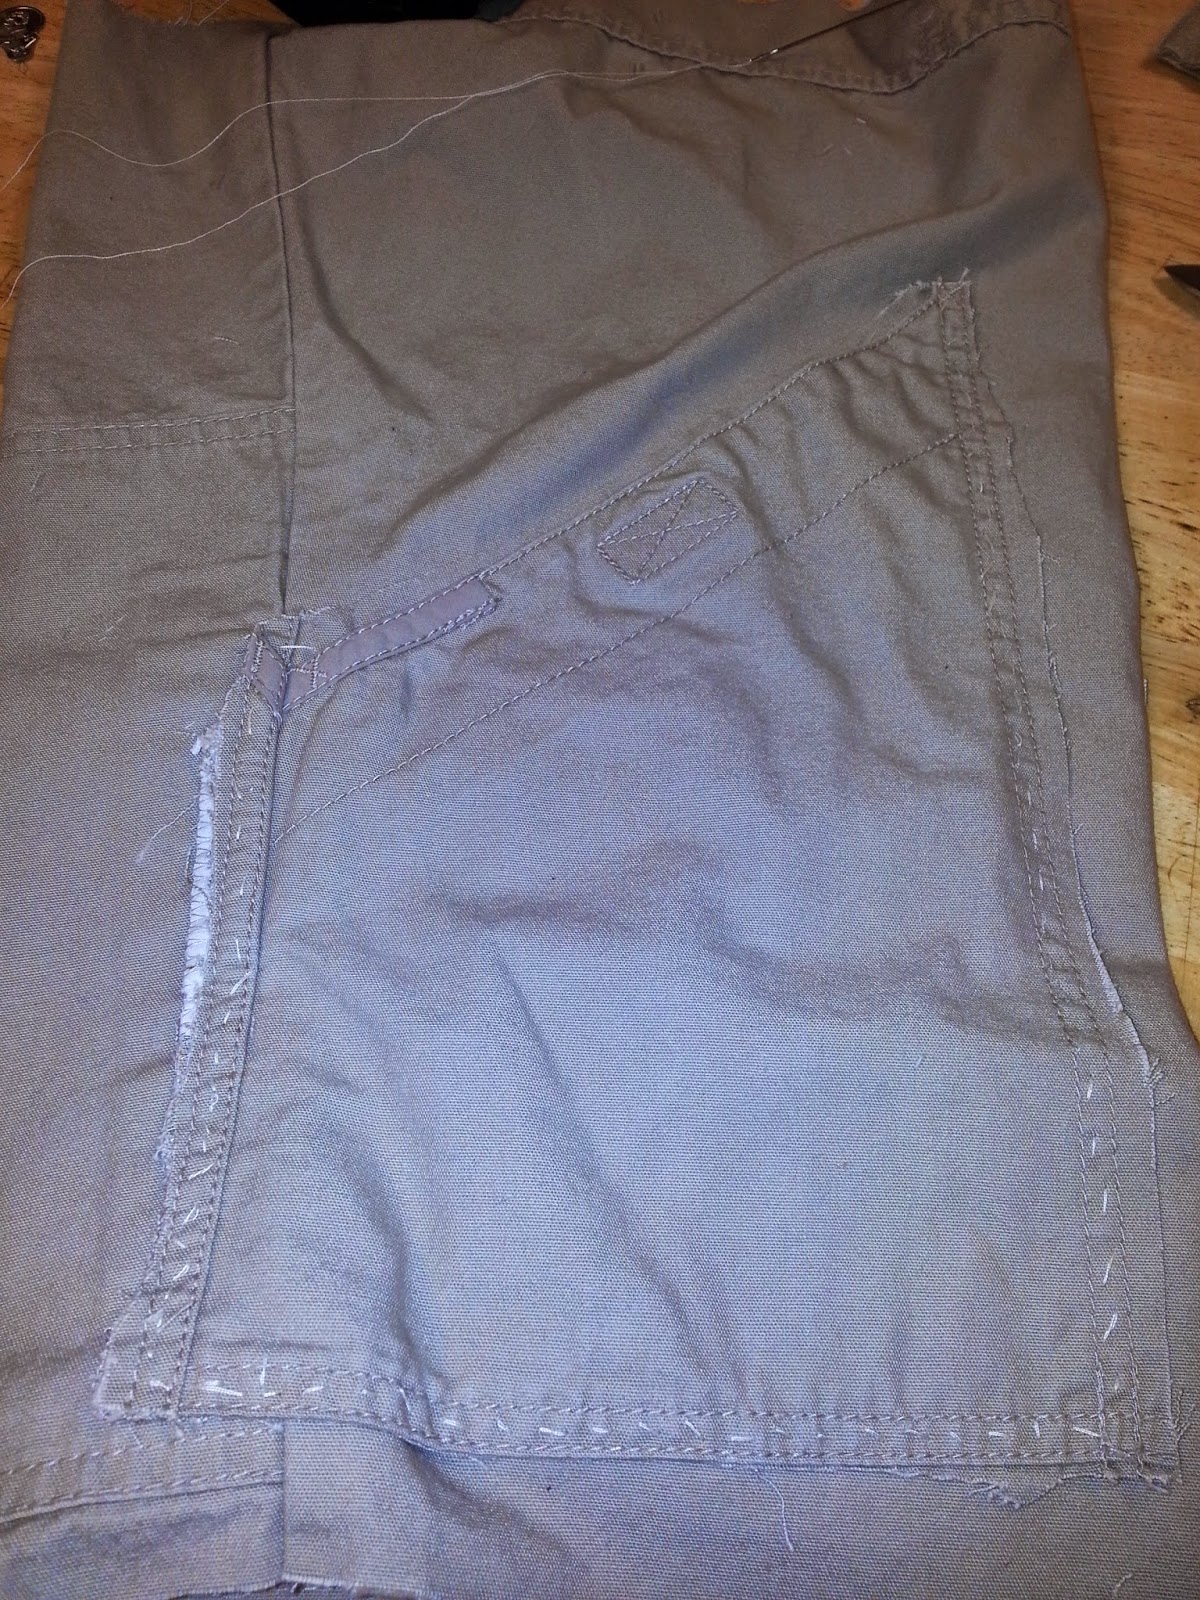 The 7 P's Blog: Handmade Ditty Bag From Old Cargo Pants